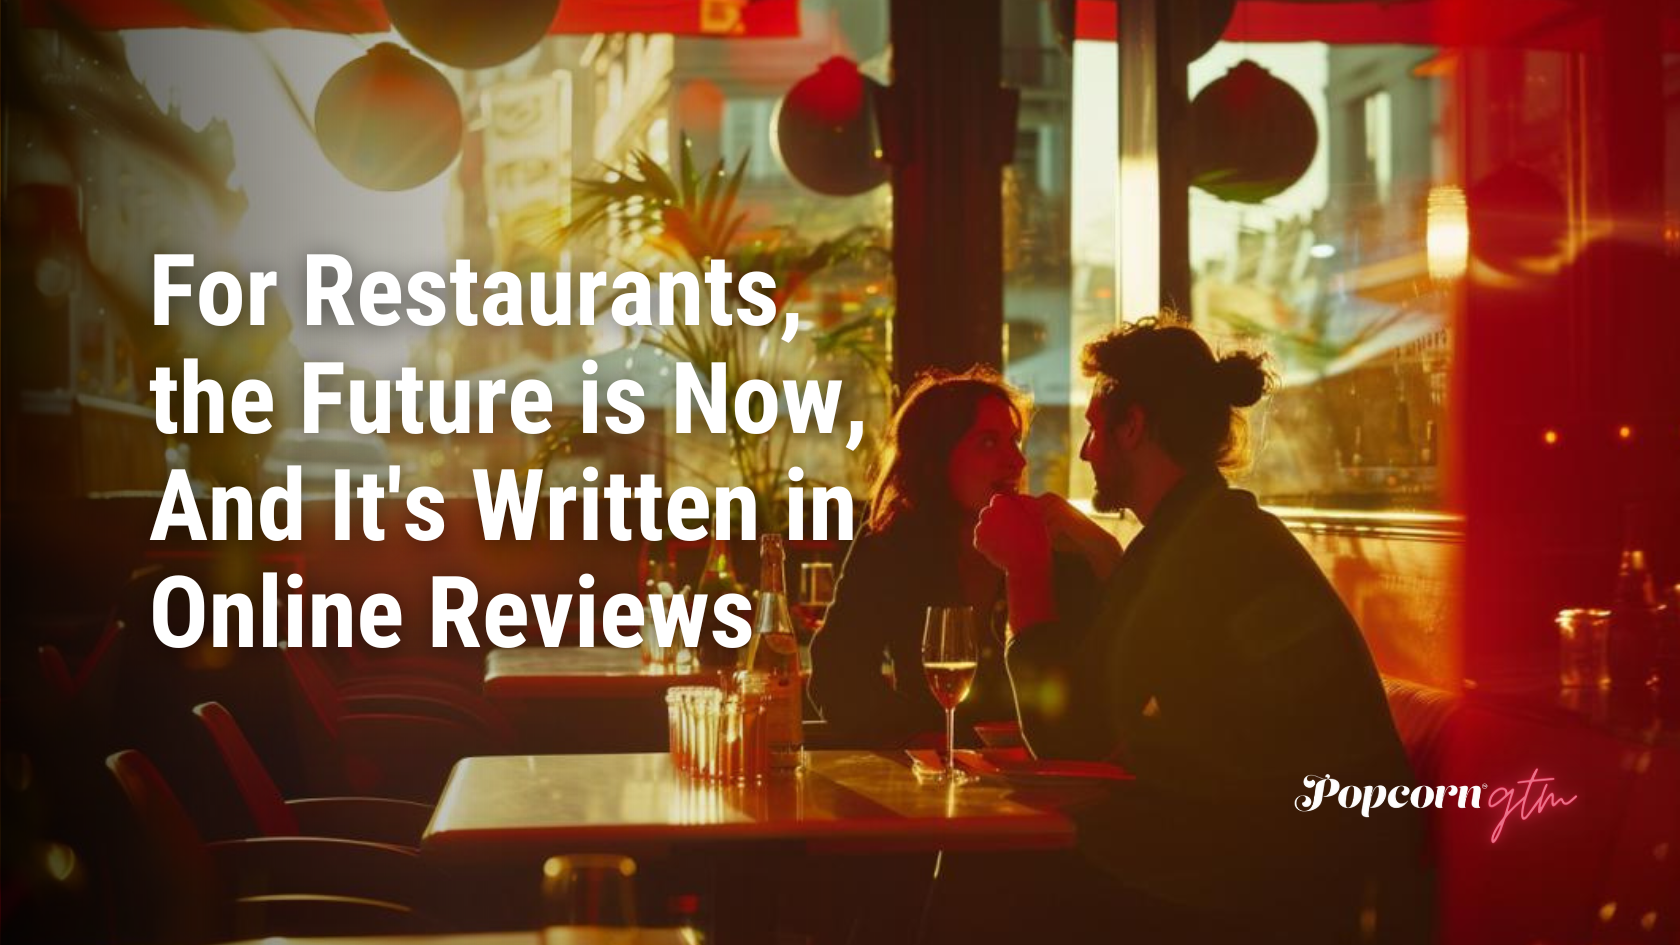 For Restaurants, the Future is Now, And It's Written in Online Reviews